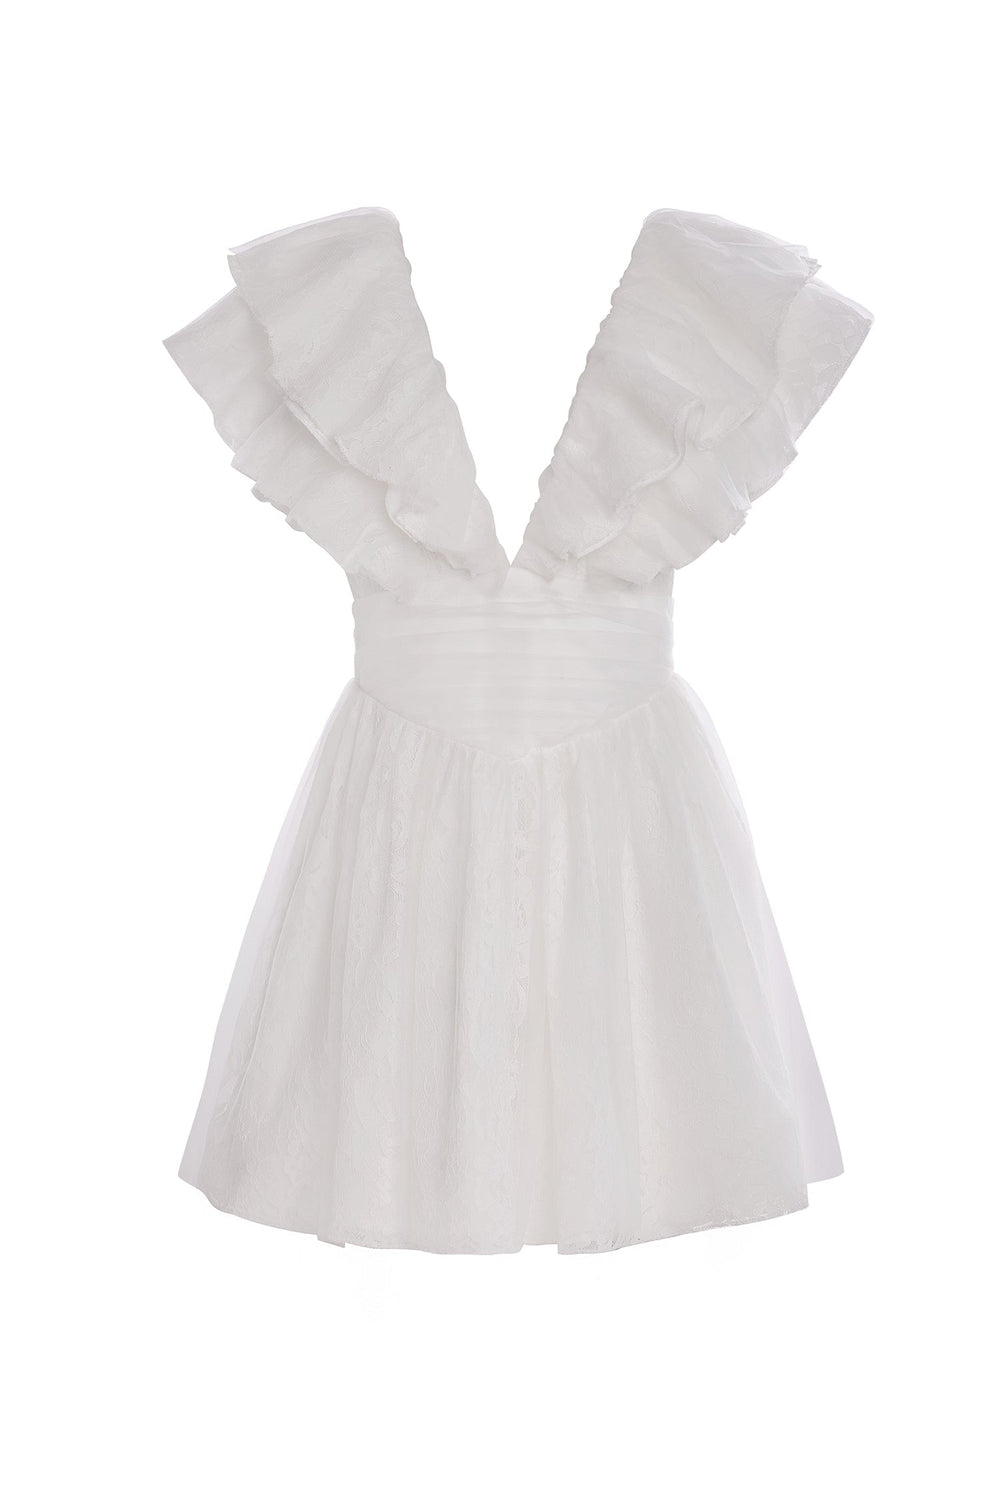 Tciana - White Lace Mini Dress with Plunge Neckline & Accent Sleeves